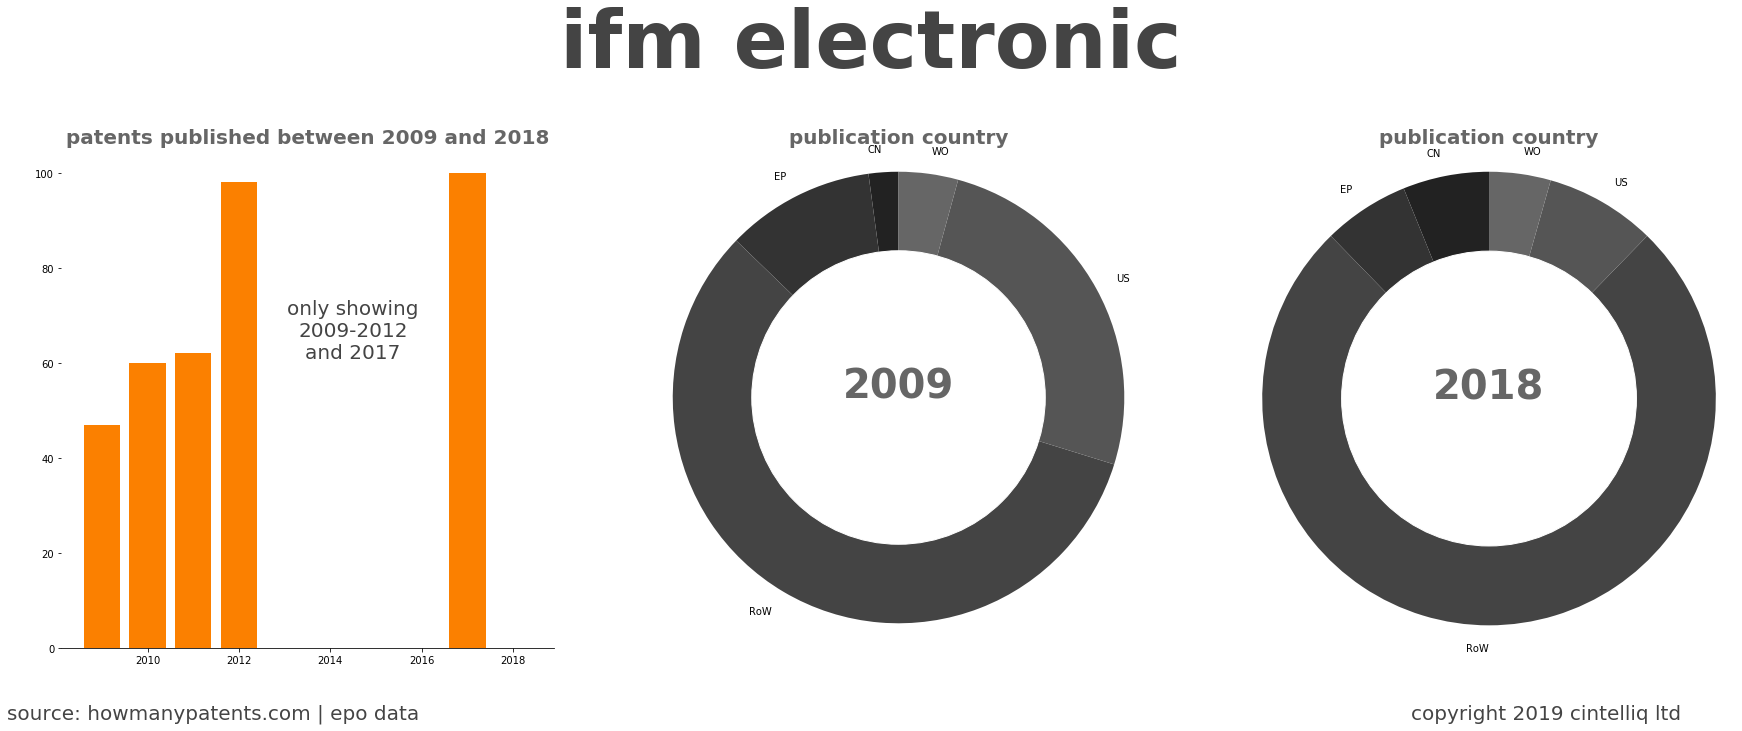 summary of patents for Ifm Electronic